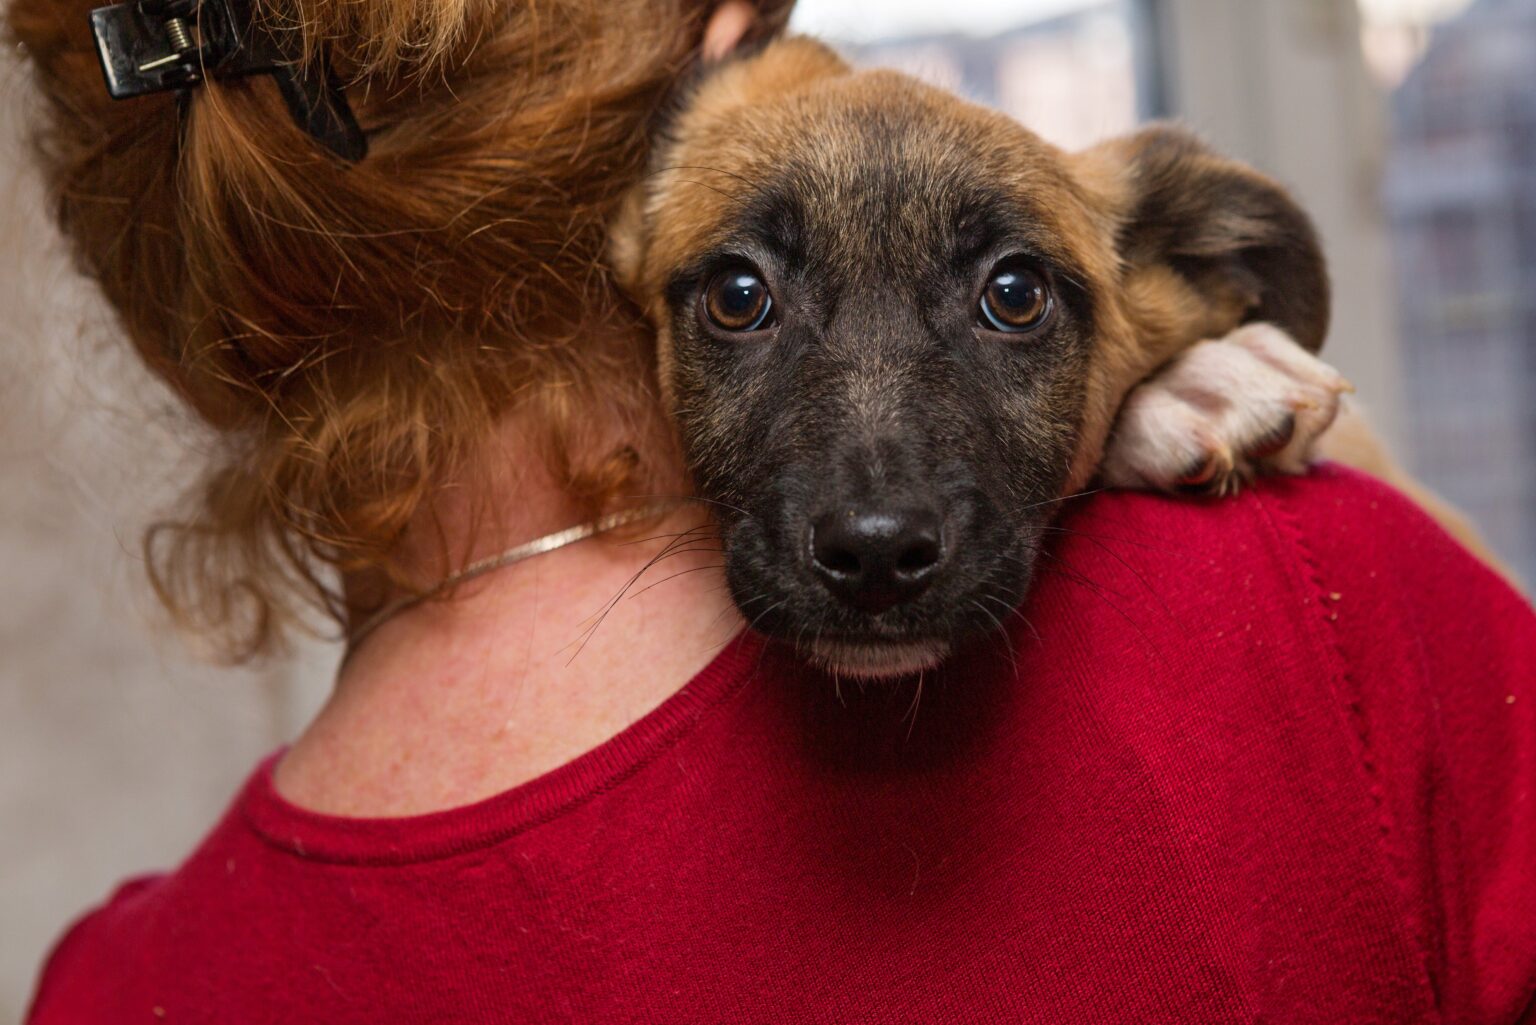 These are the best animal charities you can donate to right now.